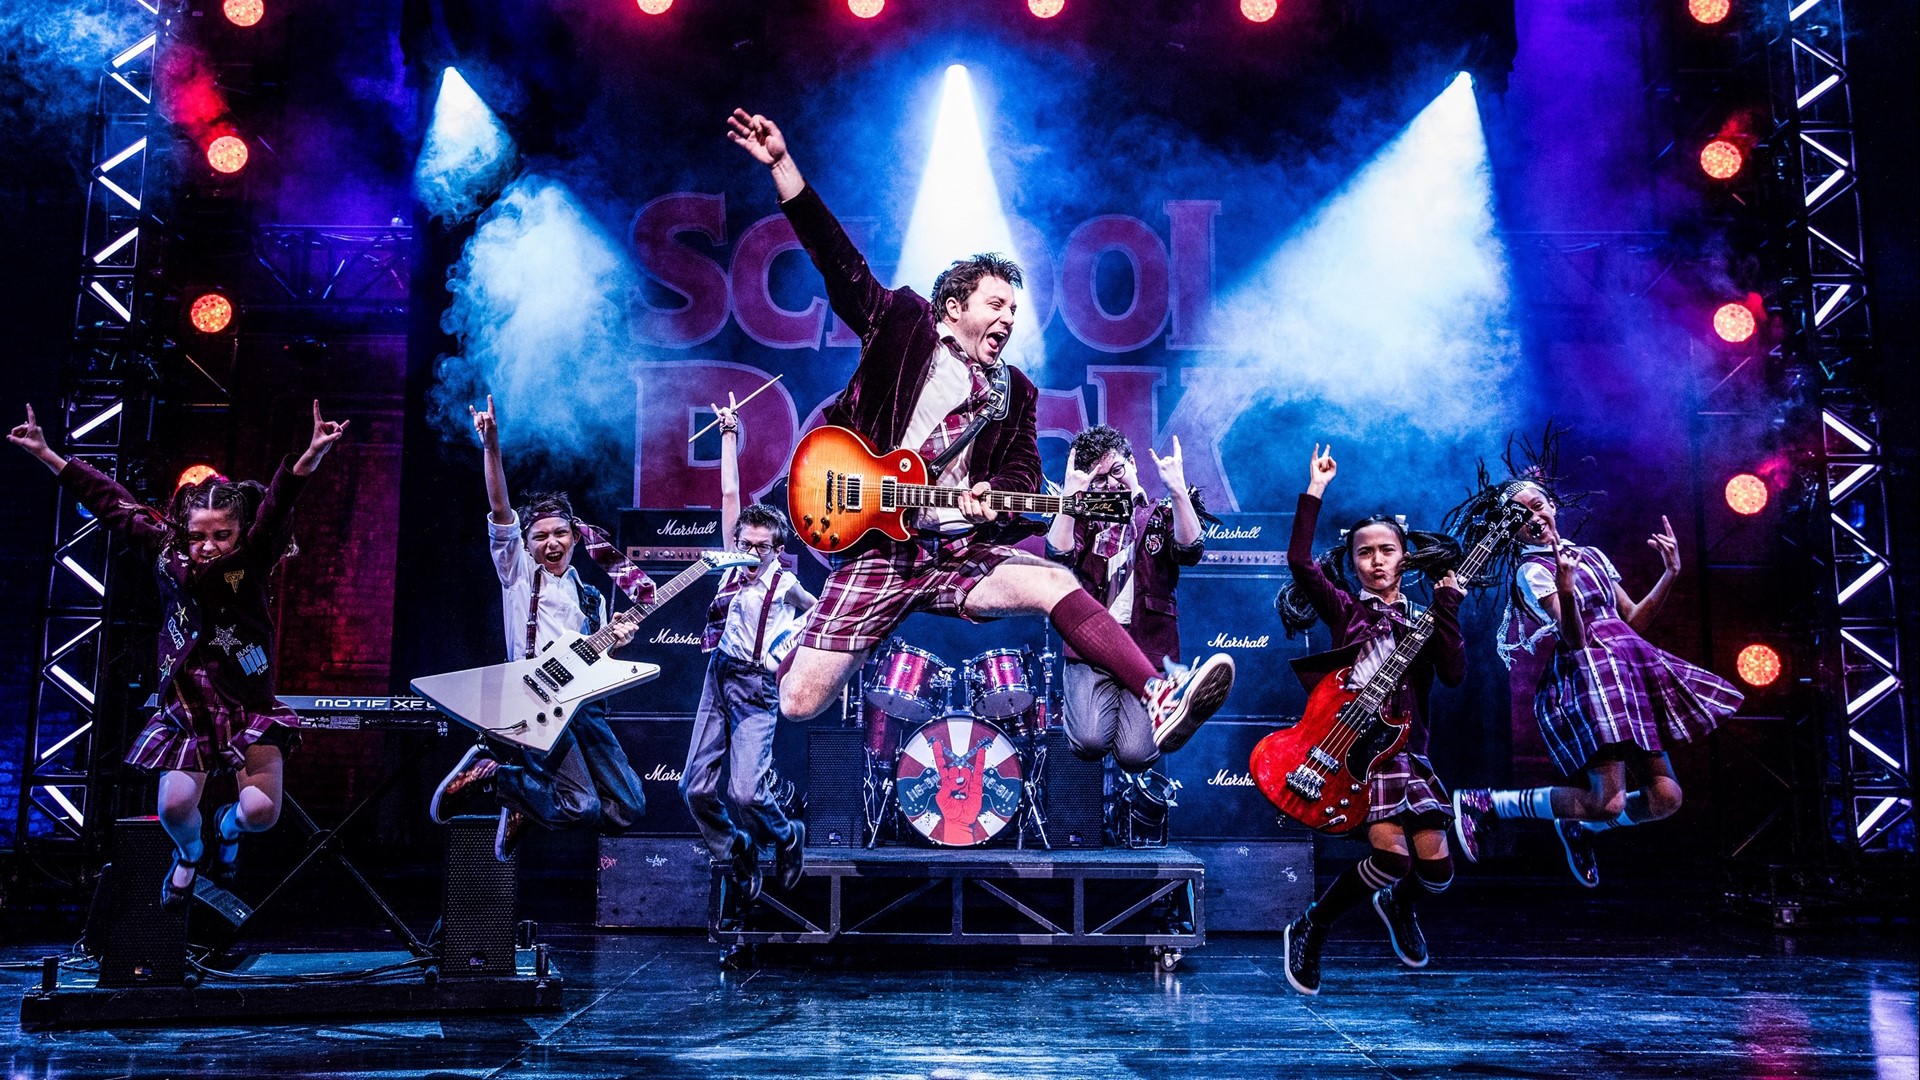 school of rock the musical the script